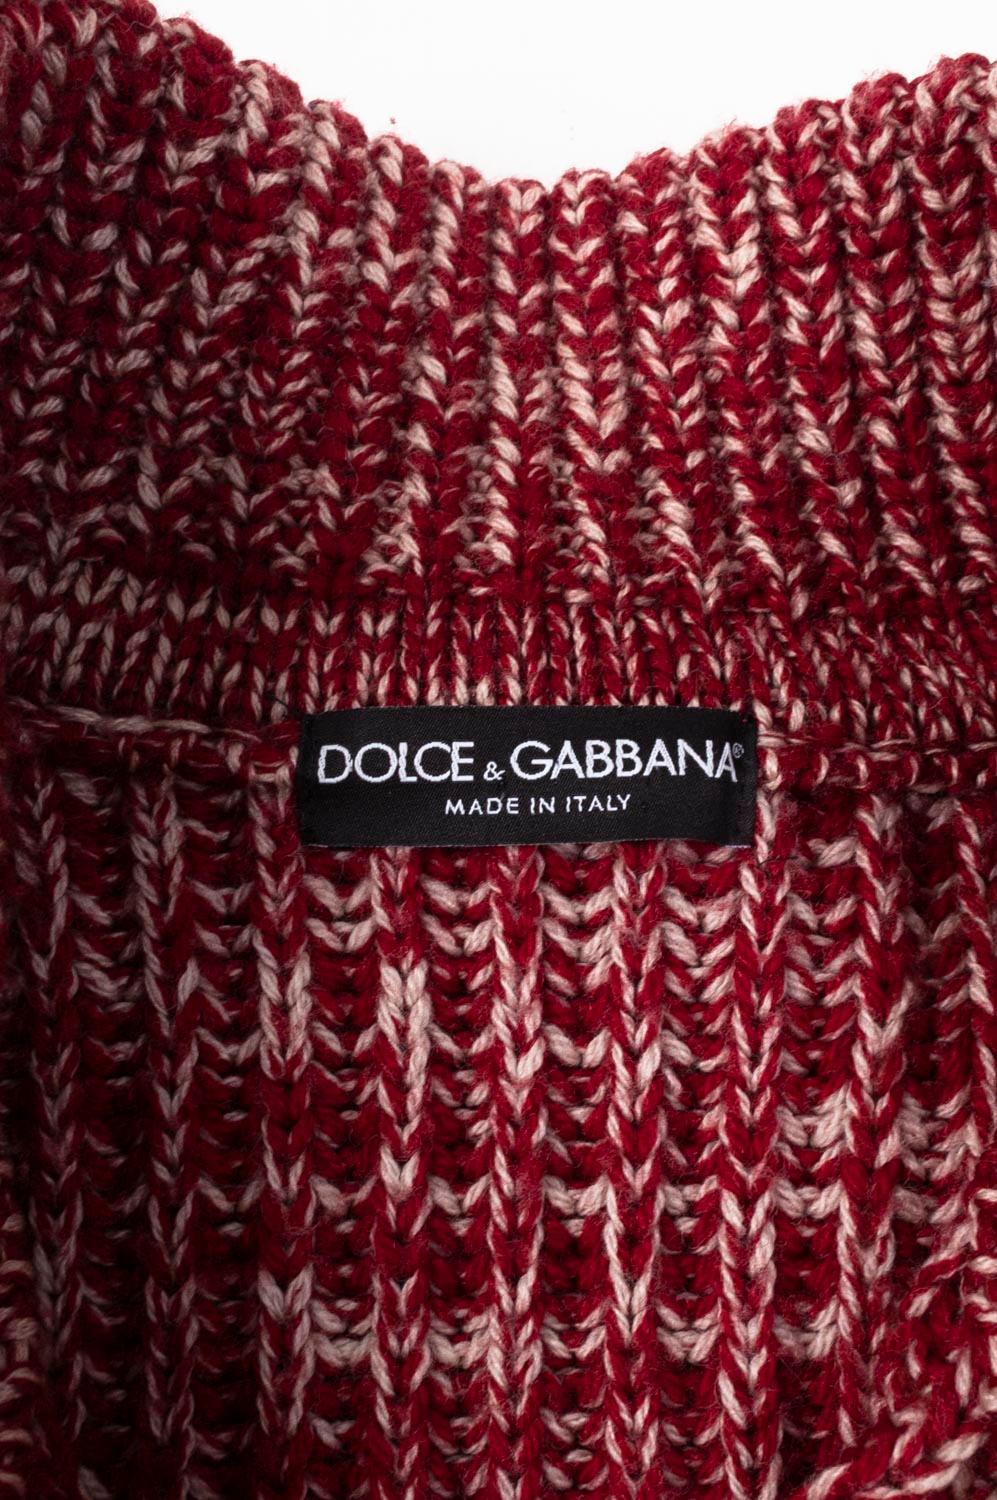 Dolce&Gabbana Wool Cardigan Sweater Men Heavy Knitted Size 50IT (Large), S403 For Sale 1